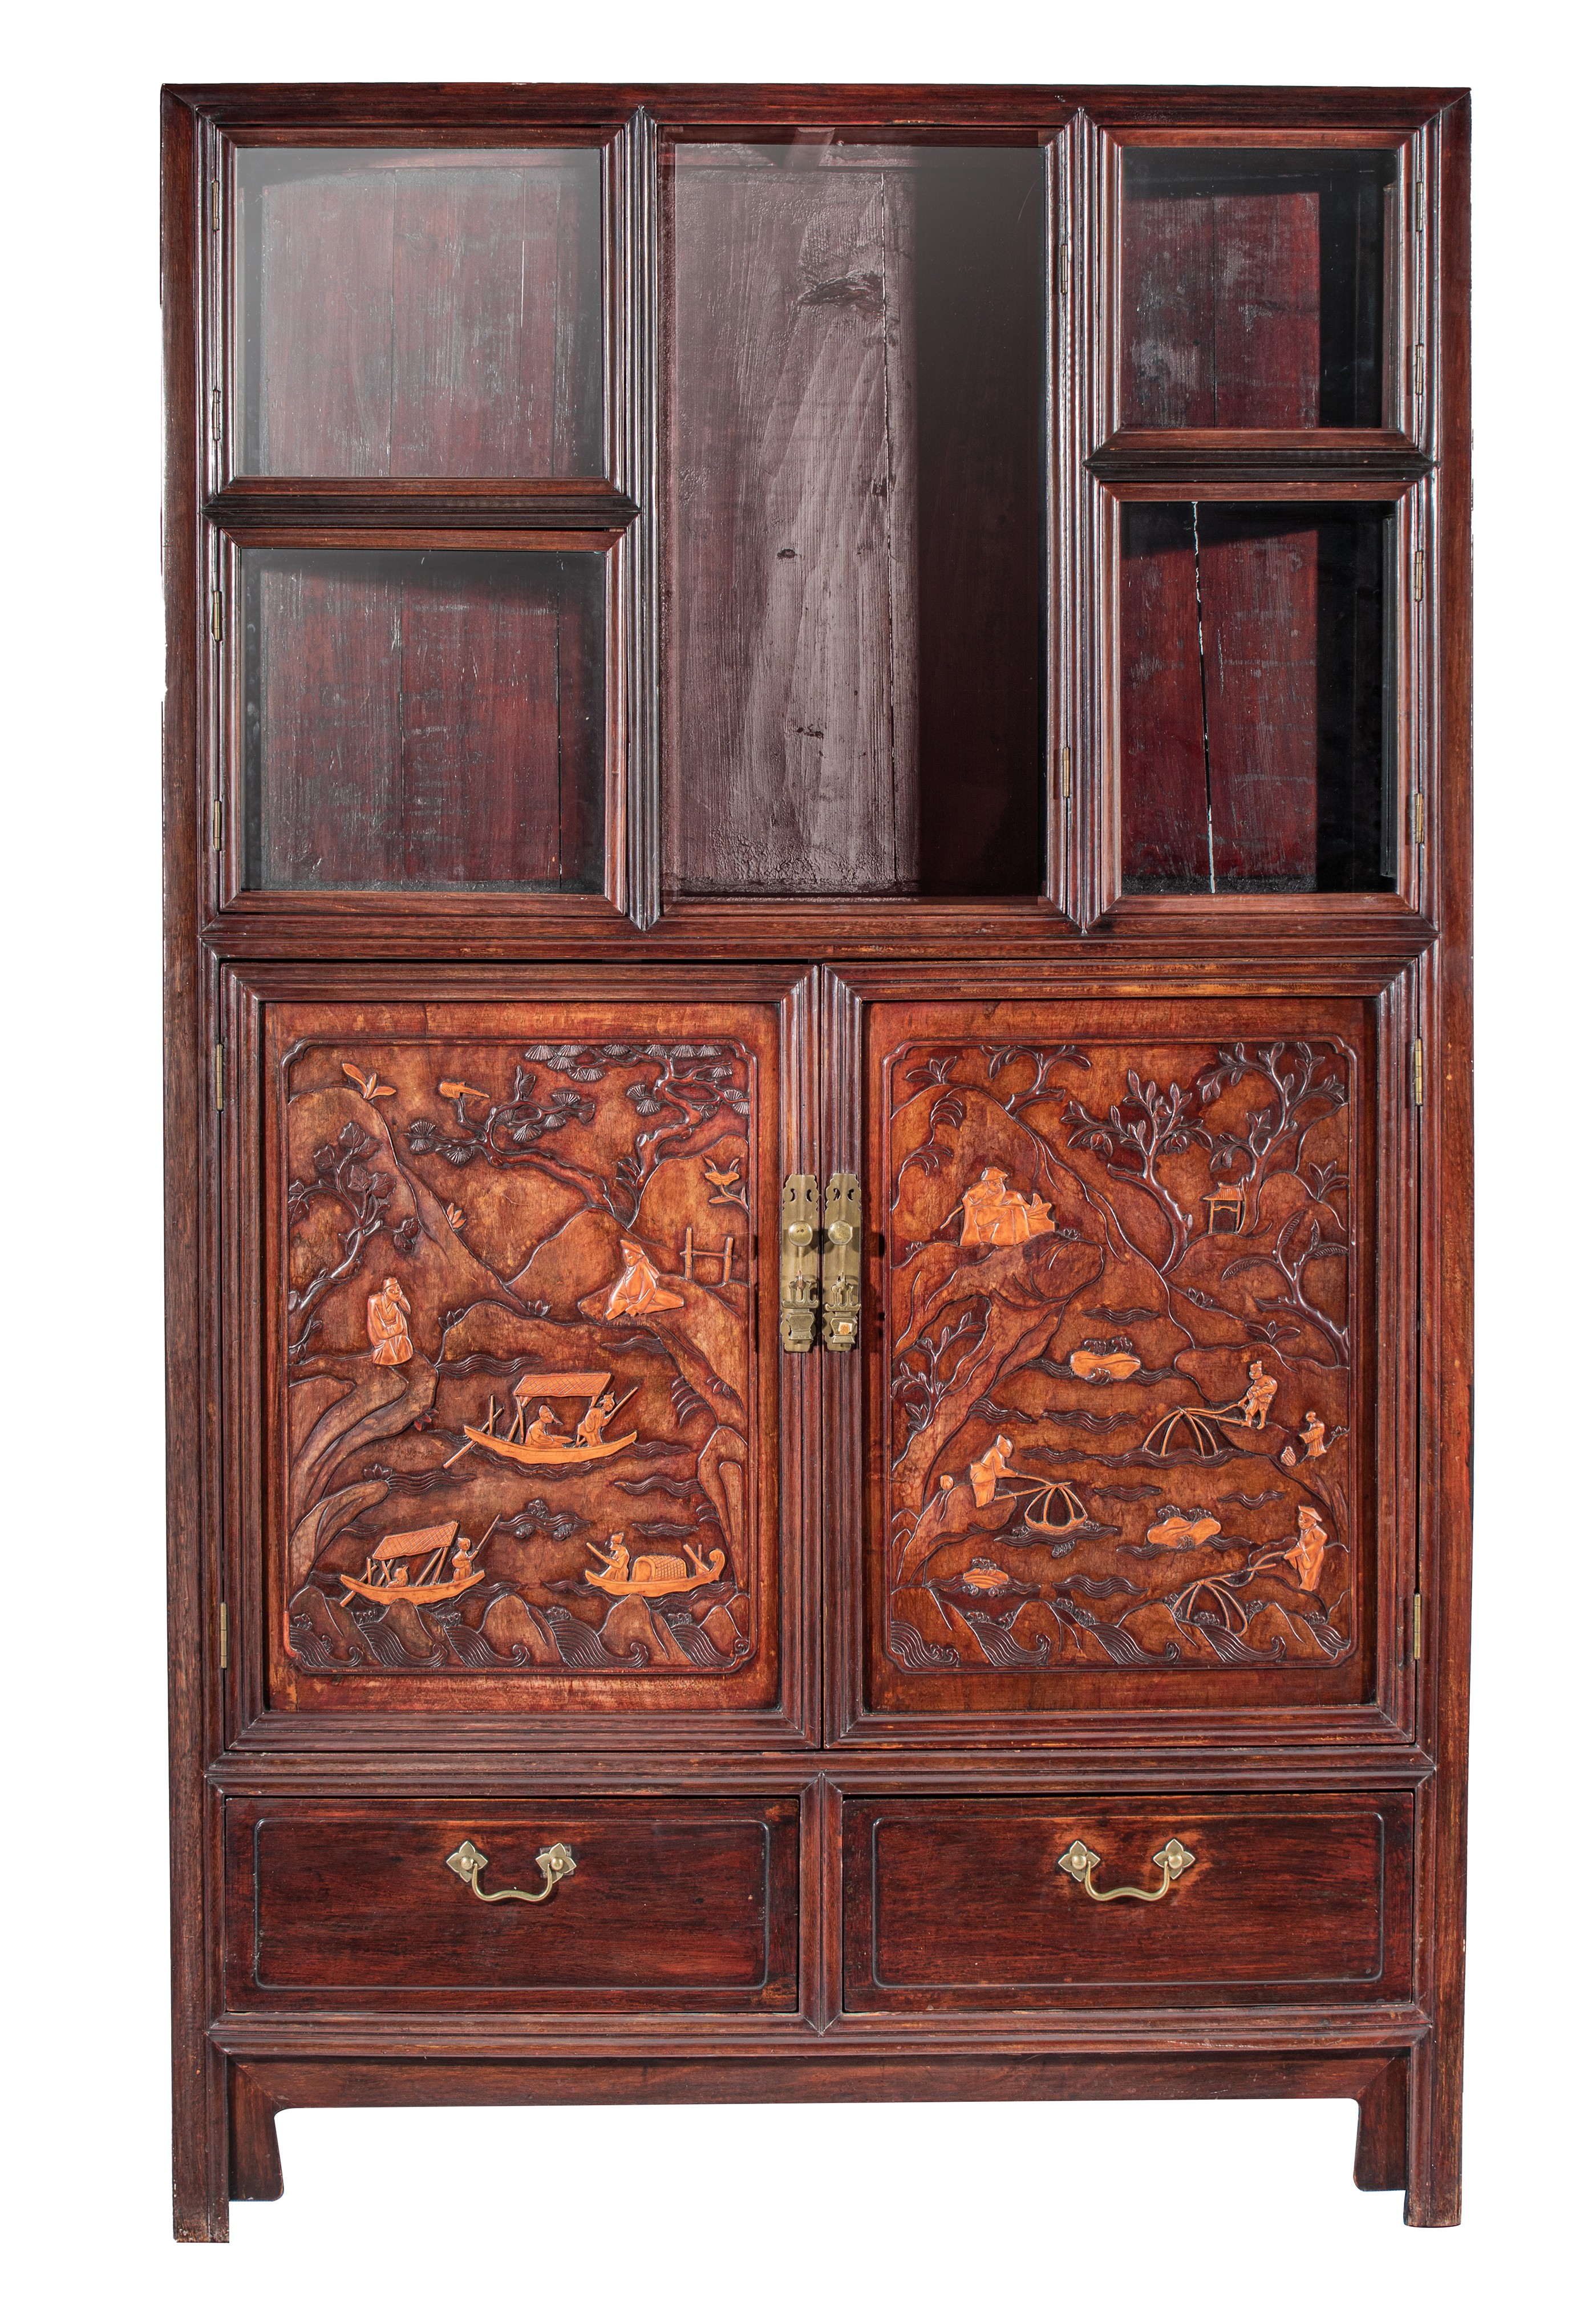 A Chinese hardwood display cabinet, H 174 - W 105 - D 52 cm